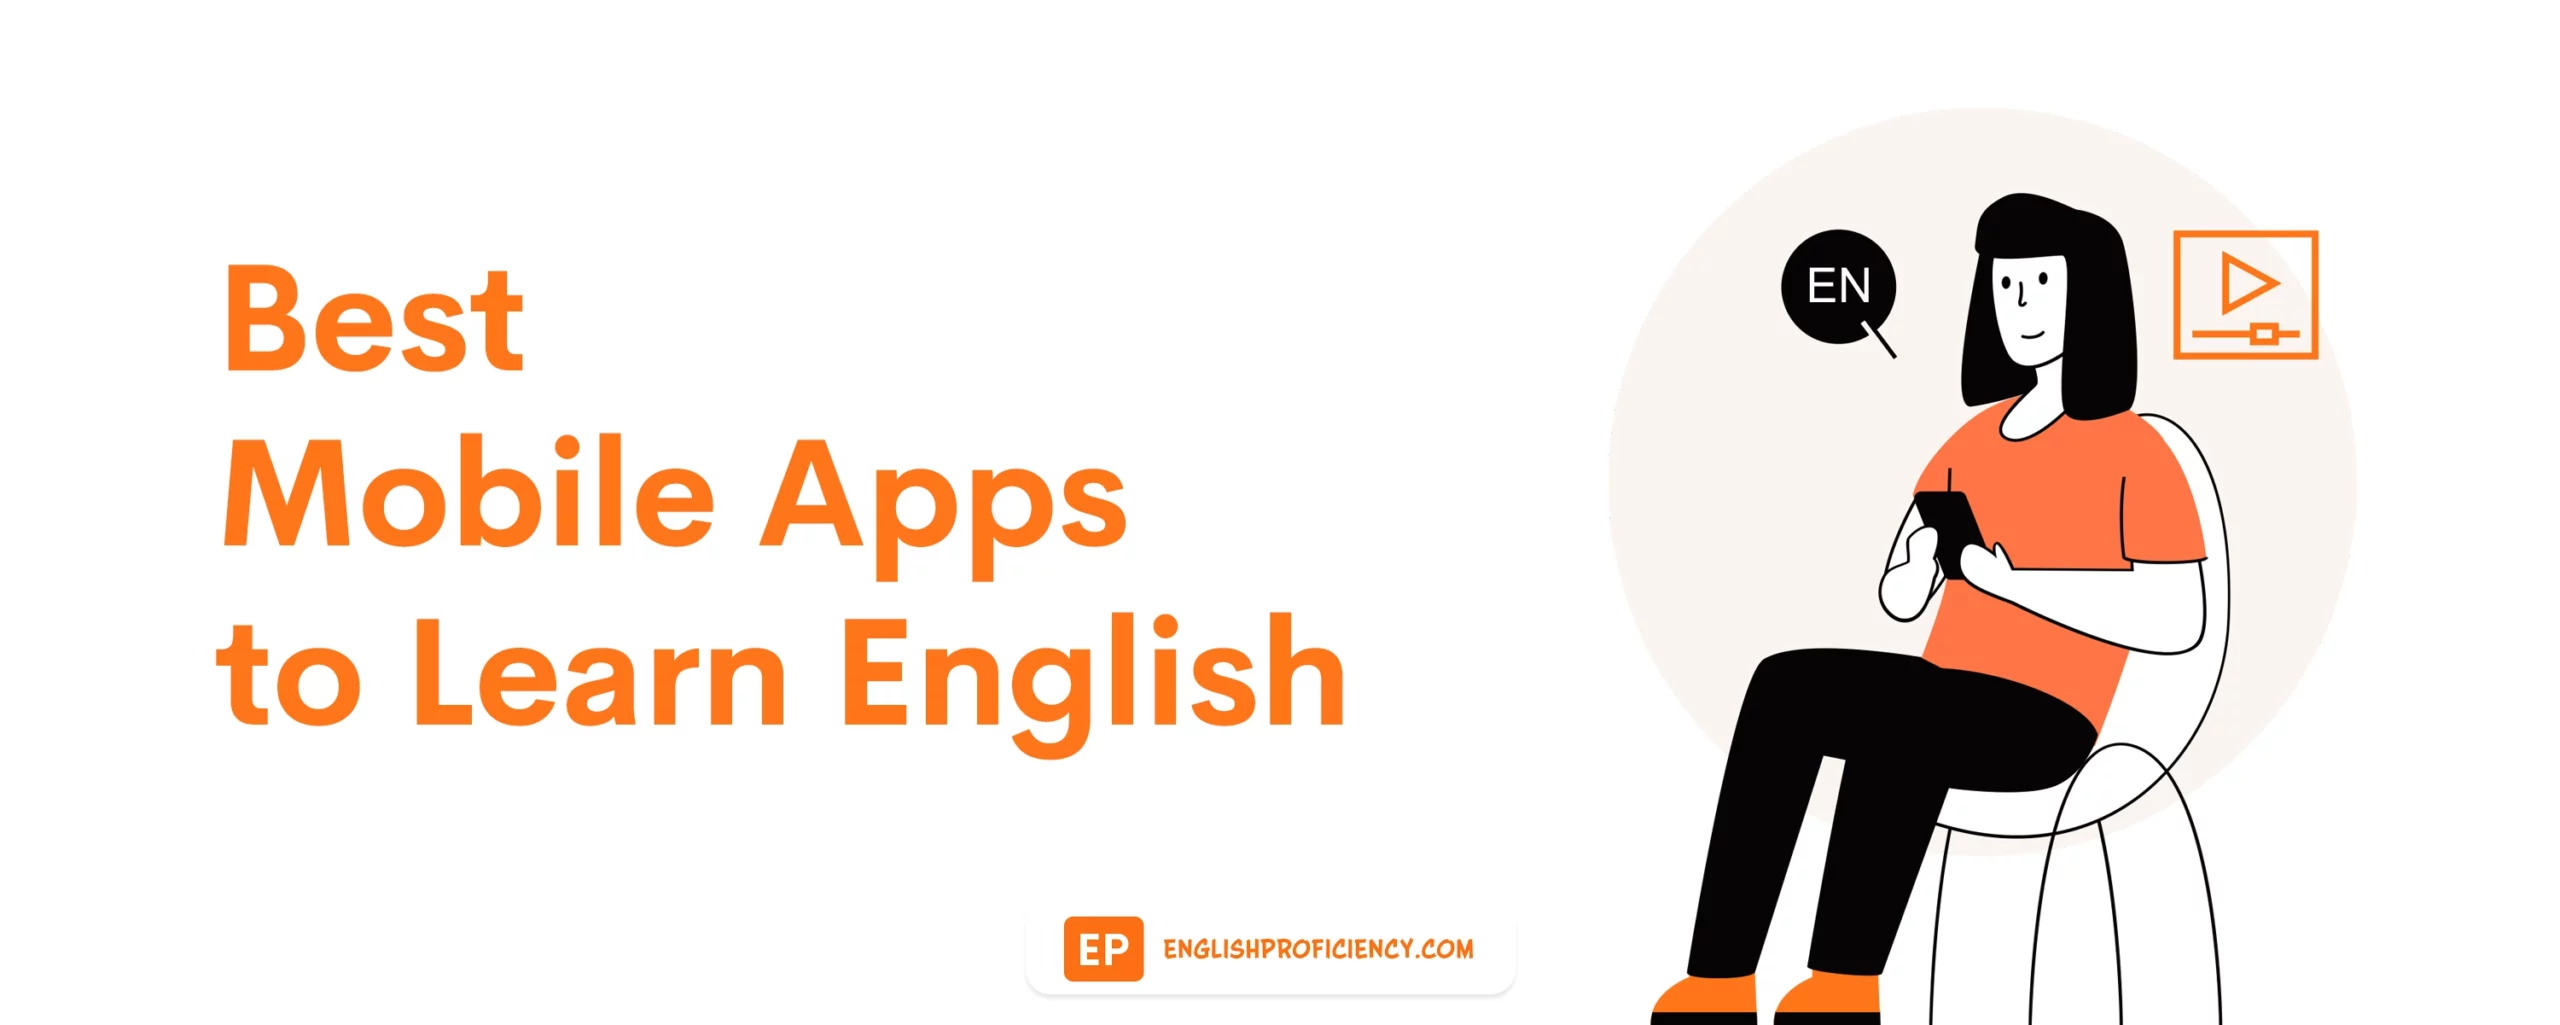 Best Mobile Apps to Learn English